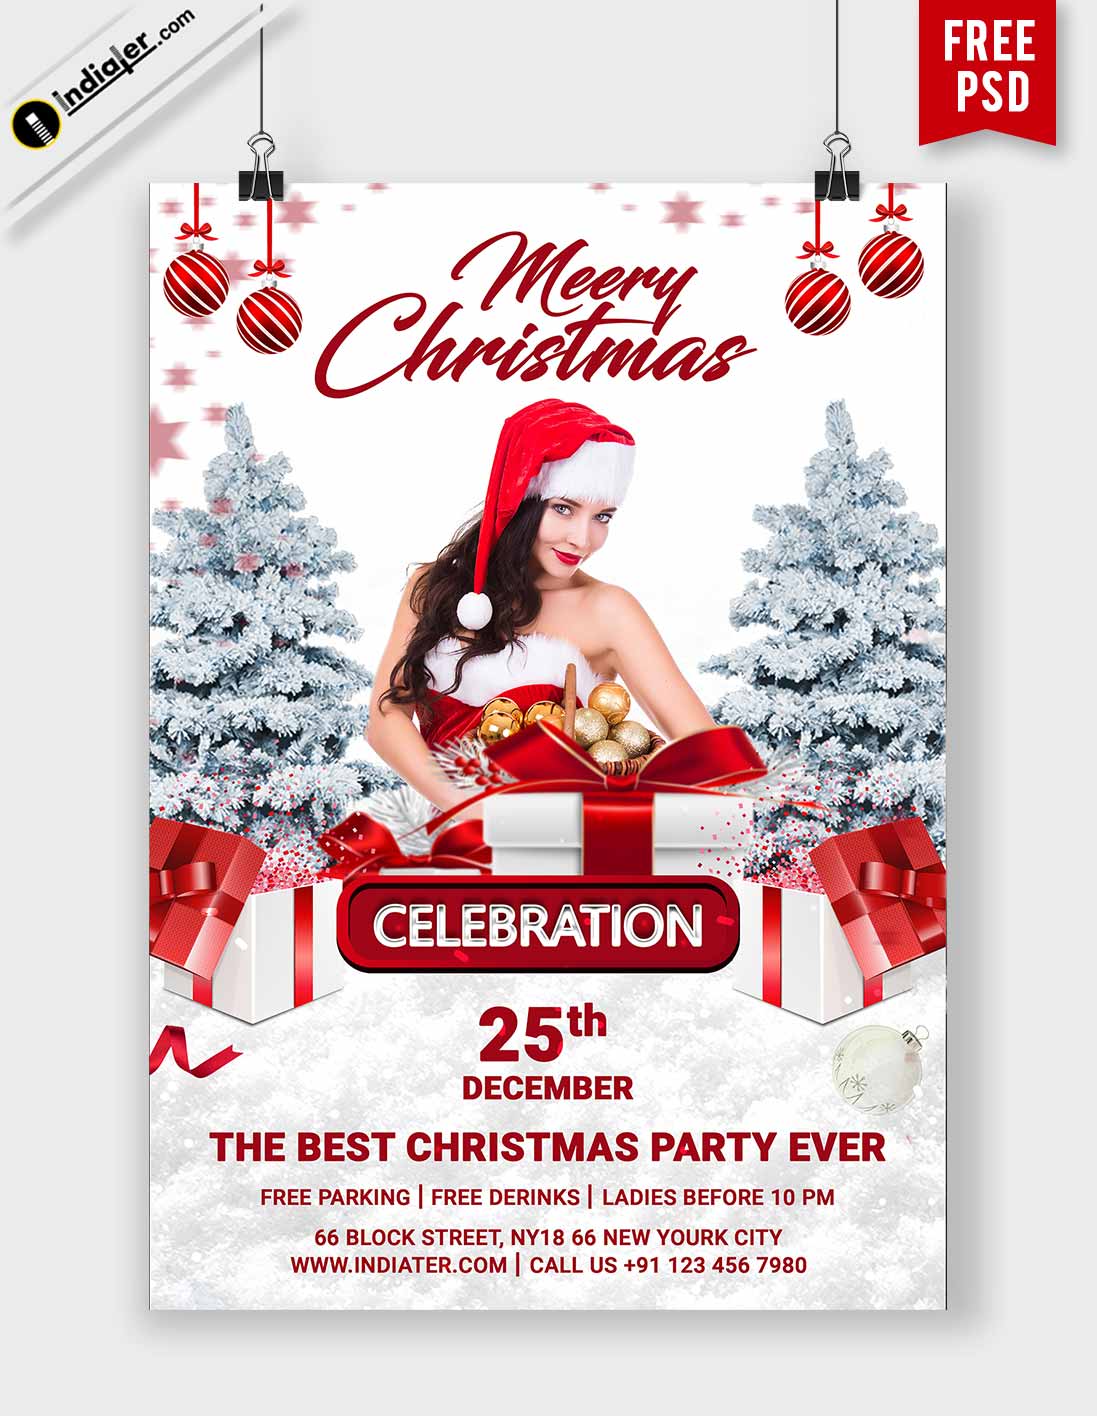 Download Free Christmas Flyer PSD Templates for Photoshop - Indiater Intended For Free Christmas Flyer Templates Word